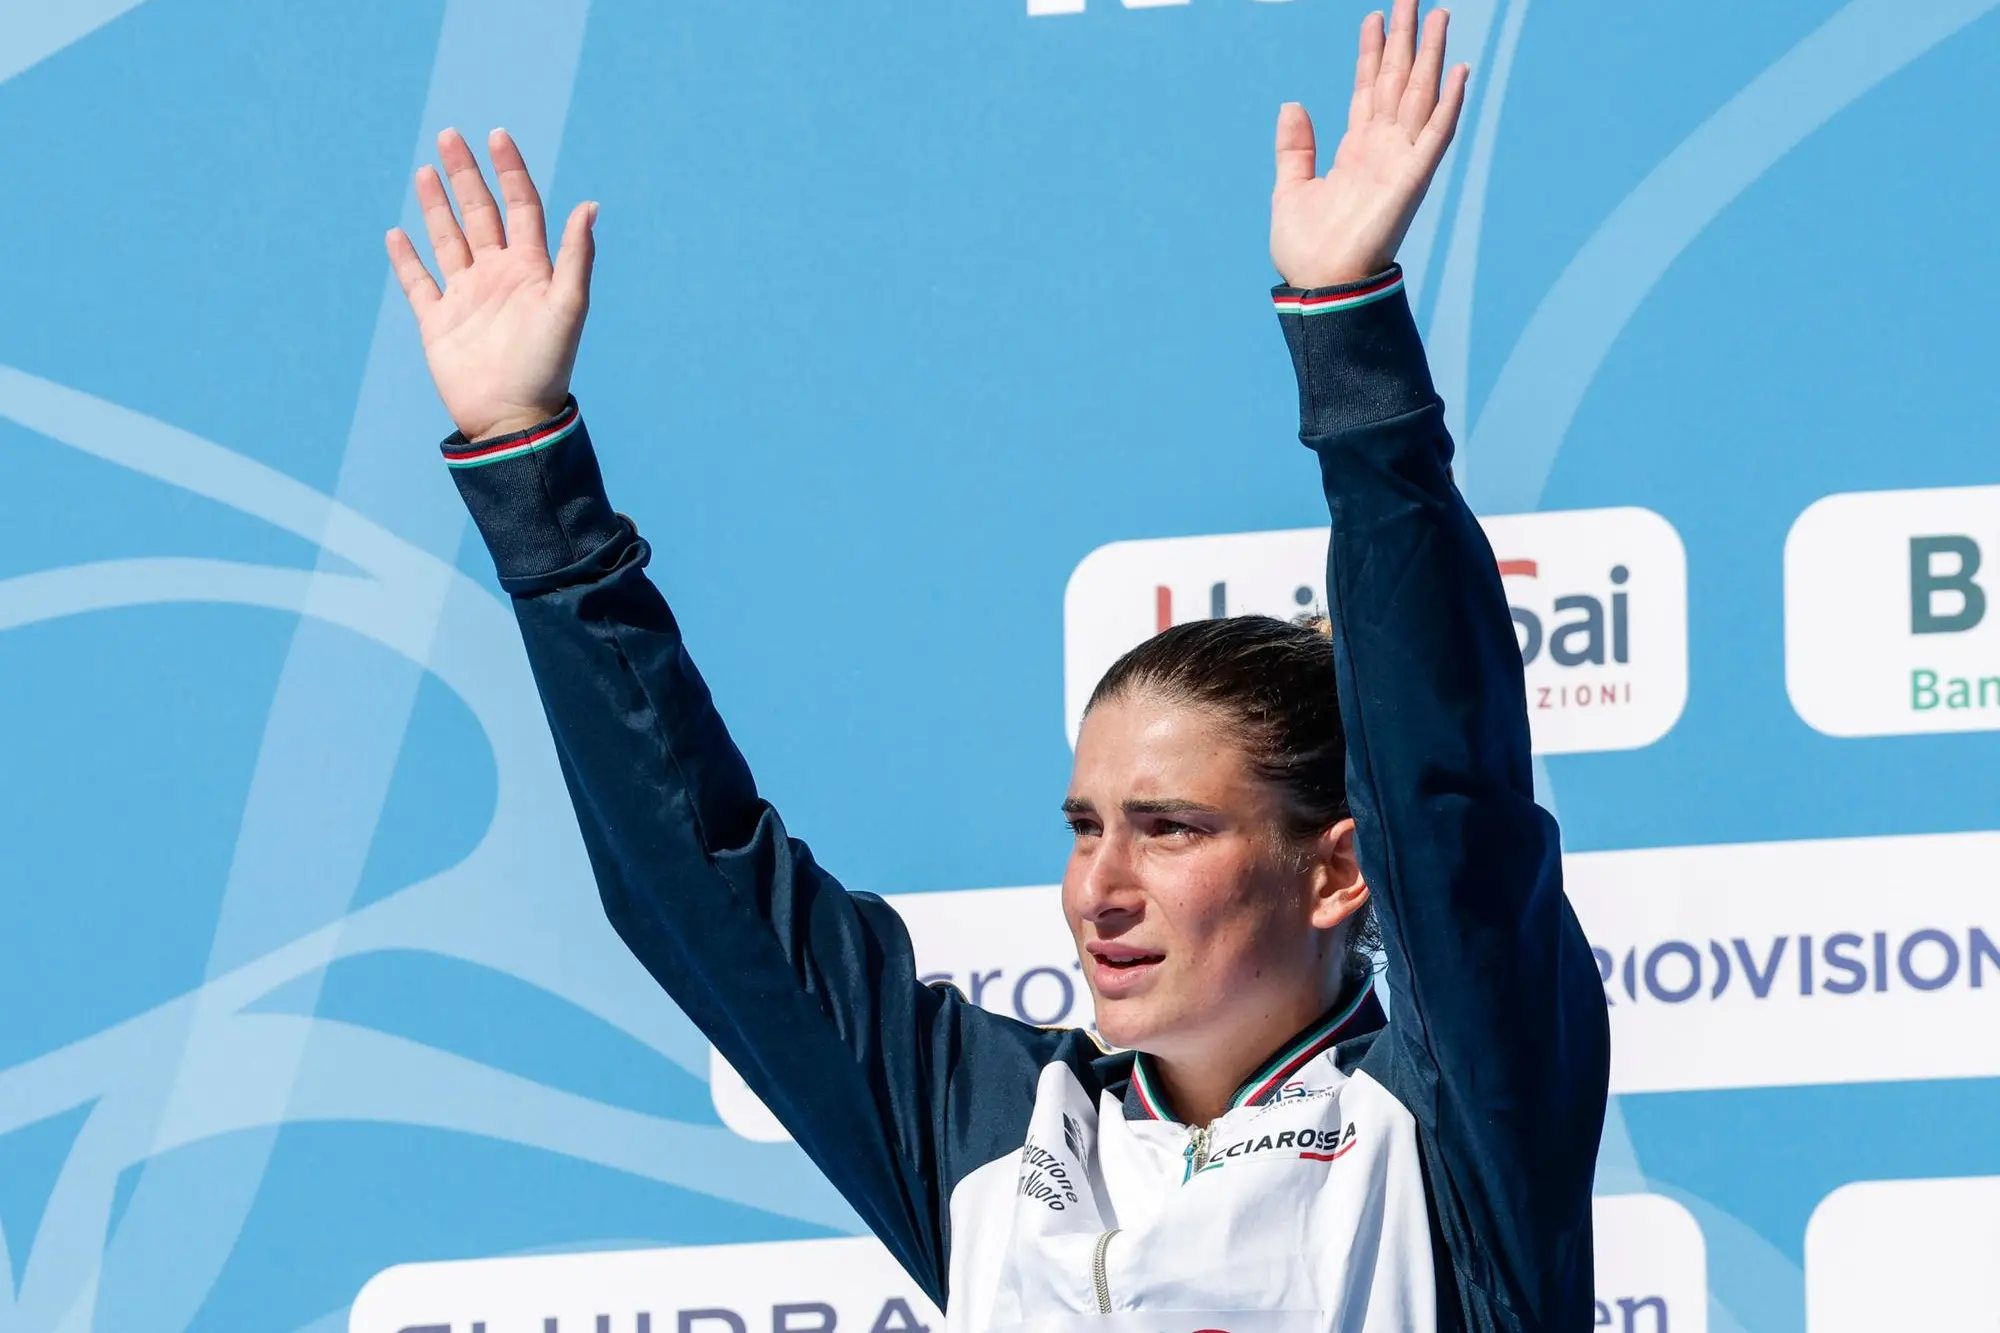 First placed Elena Bertocchi of Italy celebrates on the podium at the end of diving Women's 1m Springboard Final at the European Aquatics Championships Rome 2022, Italy, 16 August 2022. ANSA/GIUSEPPE LAMI